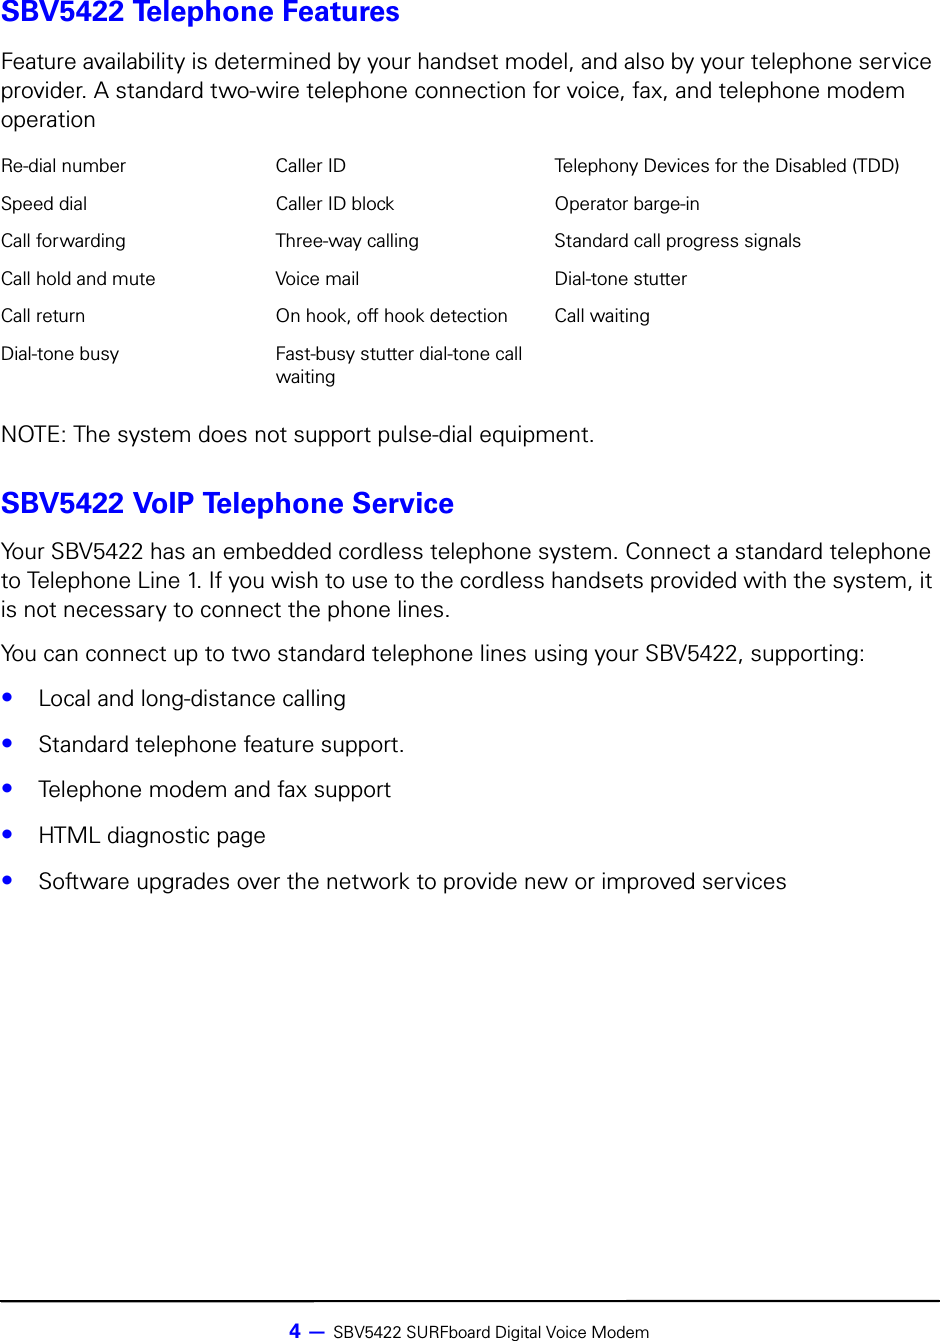 4 — SBV5422 SURFboard Digital Voice ModemSBV5422 Telephone FeaturesNOTE: The system does not support pulse-dial equipment.SBV5422 VoIP Telephone ServiceYour SBV5422 has an embedded cordless telephone system. Connect a standard telephone to Telephone Line 1. If you wish to use to the cordless handsets provided with the system, it is not necessary to connect the phone lines. You can connect up to two standard telephone lines using your SBV5422, supporting:•Local and long-distance calling•Standard telephone feature support. •Telephone modem and fax support•HTML diagnostic page•Software upgrades over the network to provide new or improved servicesFeature availability is determined by your handset model, and also by your telephone service provider. A standard two-wire telephone connection for voice, fax, and telephone modem operationRe-dial number Caller ID Telephony Devices for the Disabled (TDD)Speed dial Caller ID block Operator barge-inCall forwarding Three-way calling Standard call progress signalsCall hold and mute Voice mail Dial-tone stutterCall return On hook, off hook detection Call waitingDial-tone busy Fast-busy stutter dial-tone call waiting